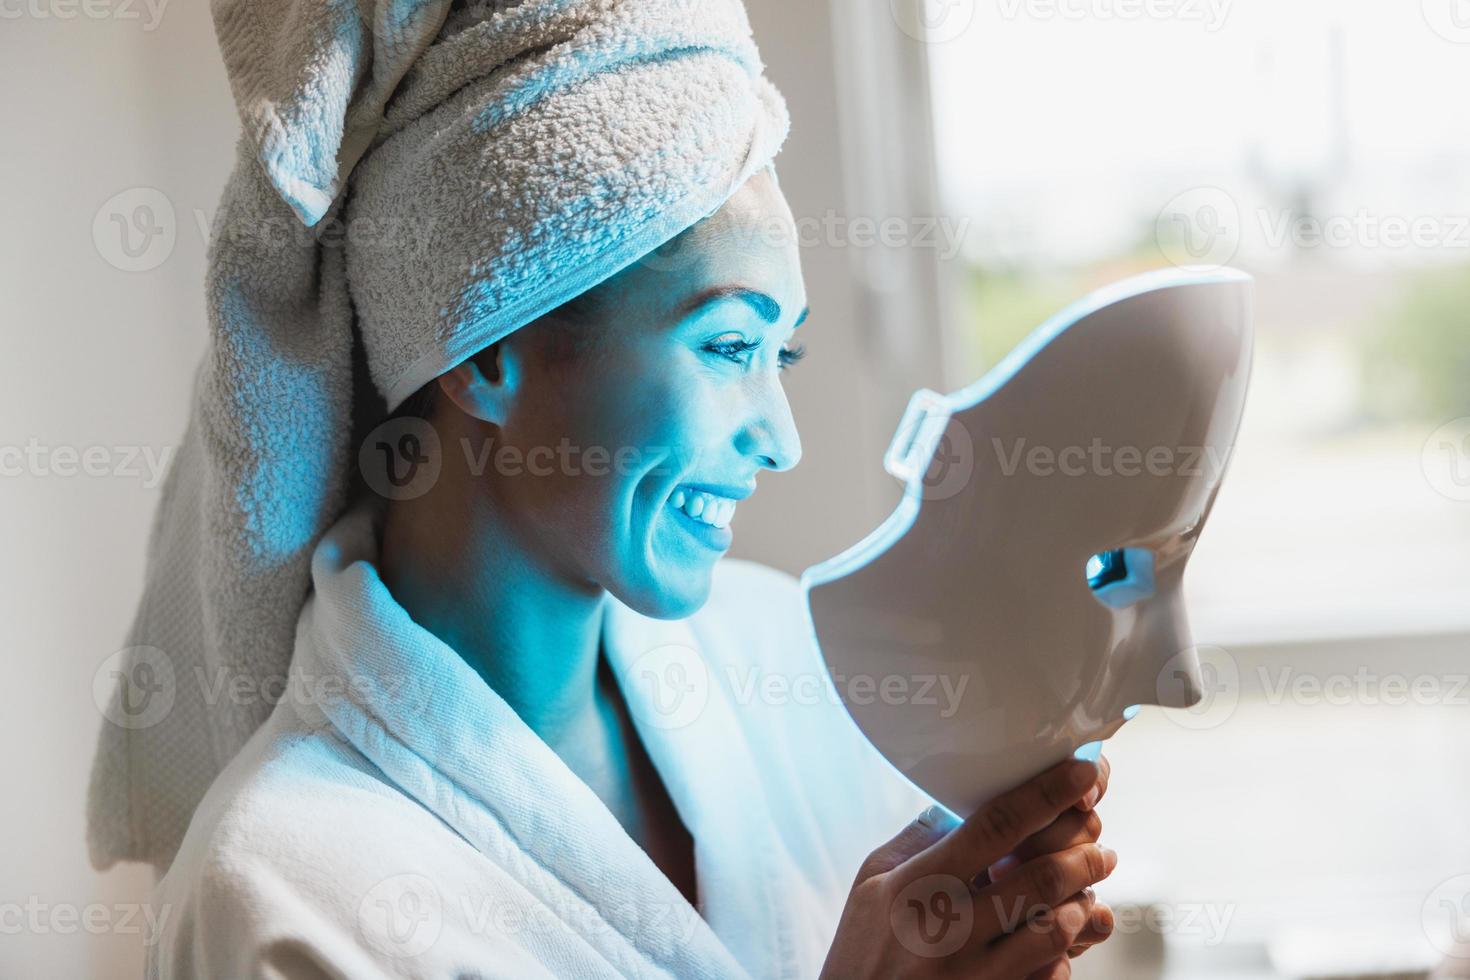 Woman Getting A Led Light Facial Mask Treatment At The Beauty Salon photo